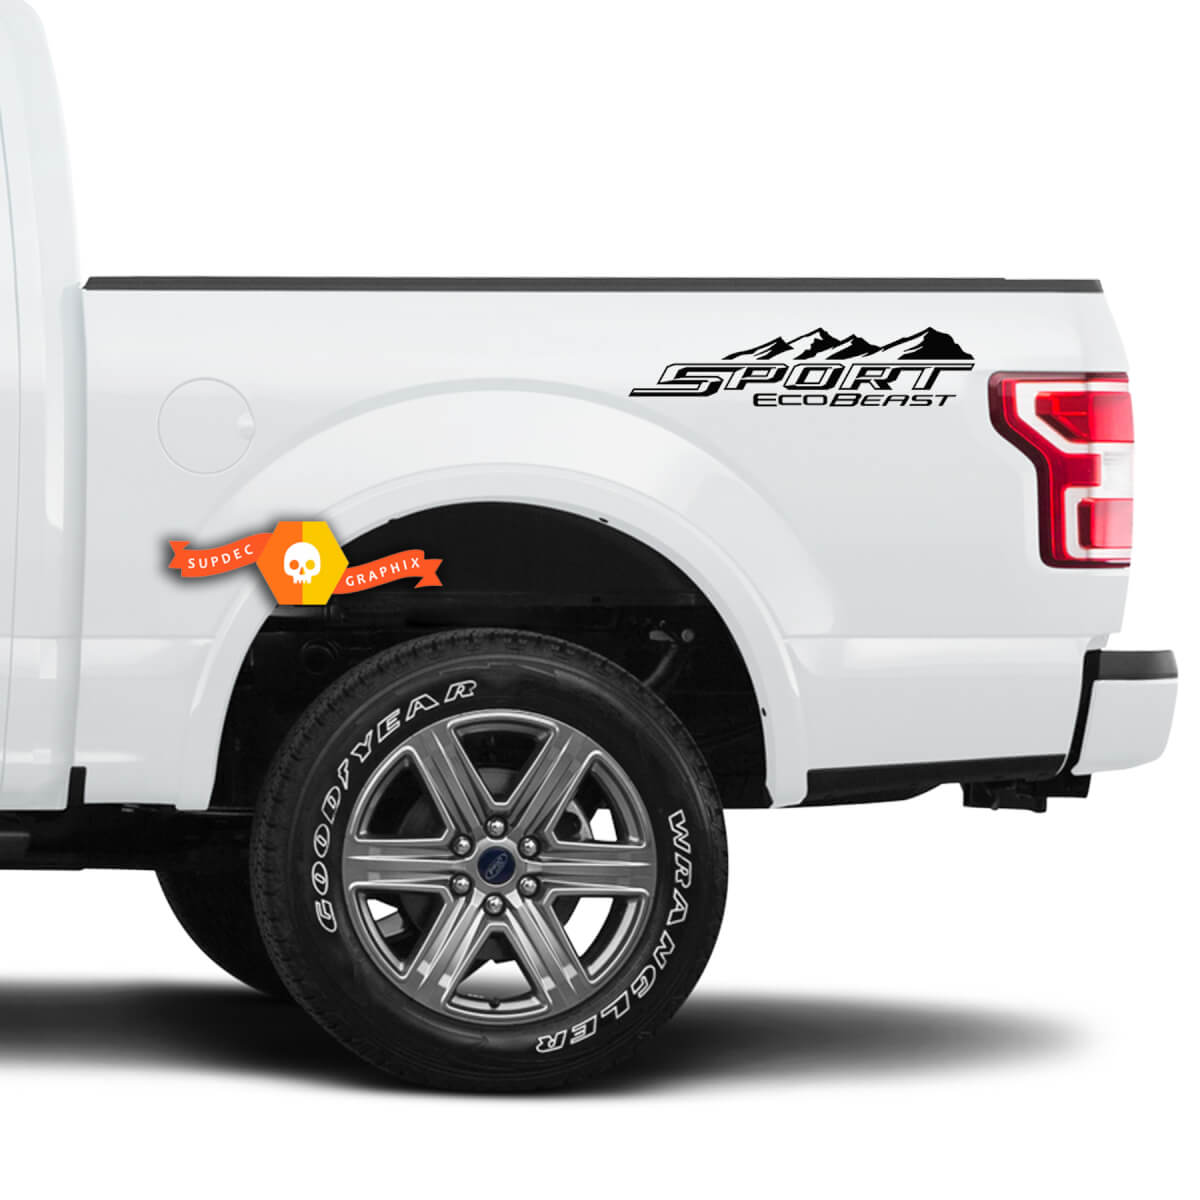 Pair Sport 4X4 Mountain EcoBeast Decals For Ford F150 F250 F350 Super Duty Truck Sticker Decal Vinyl
